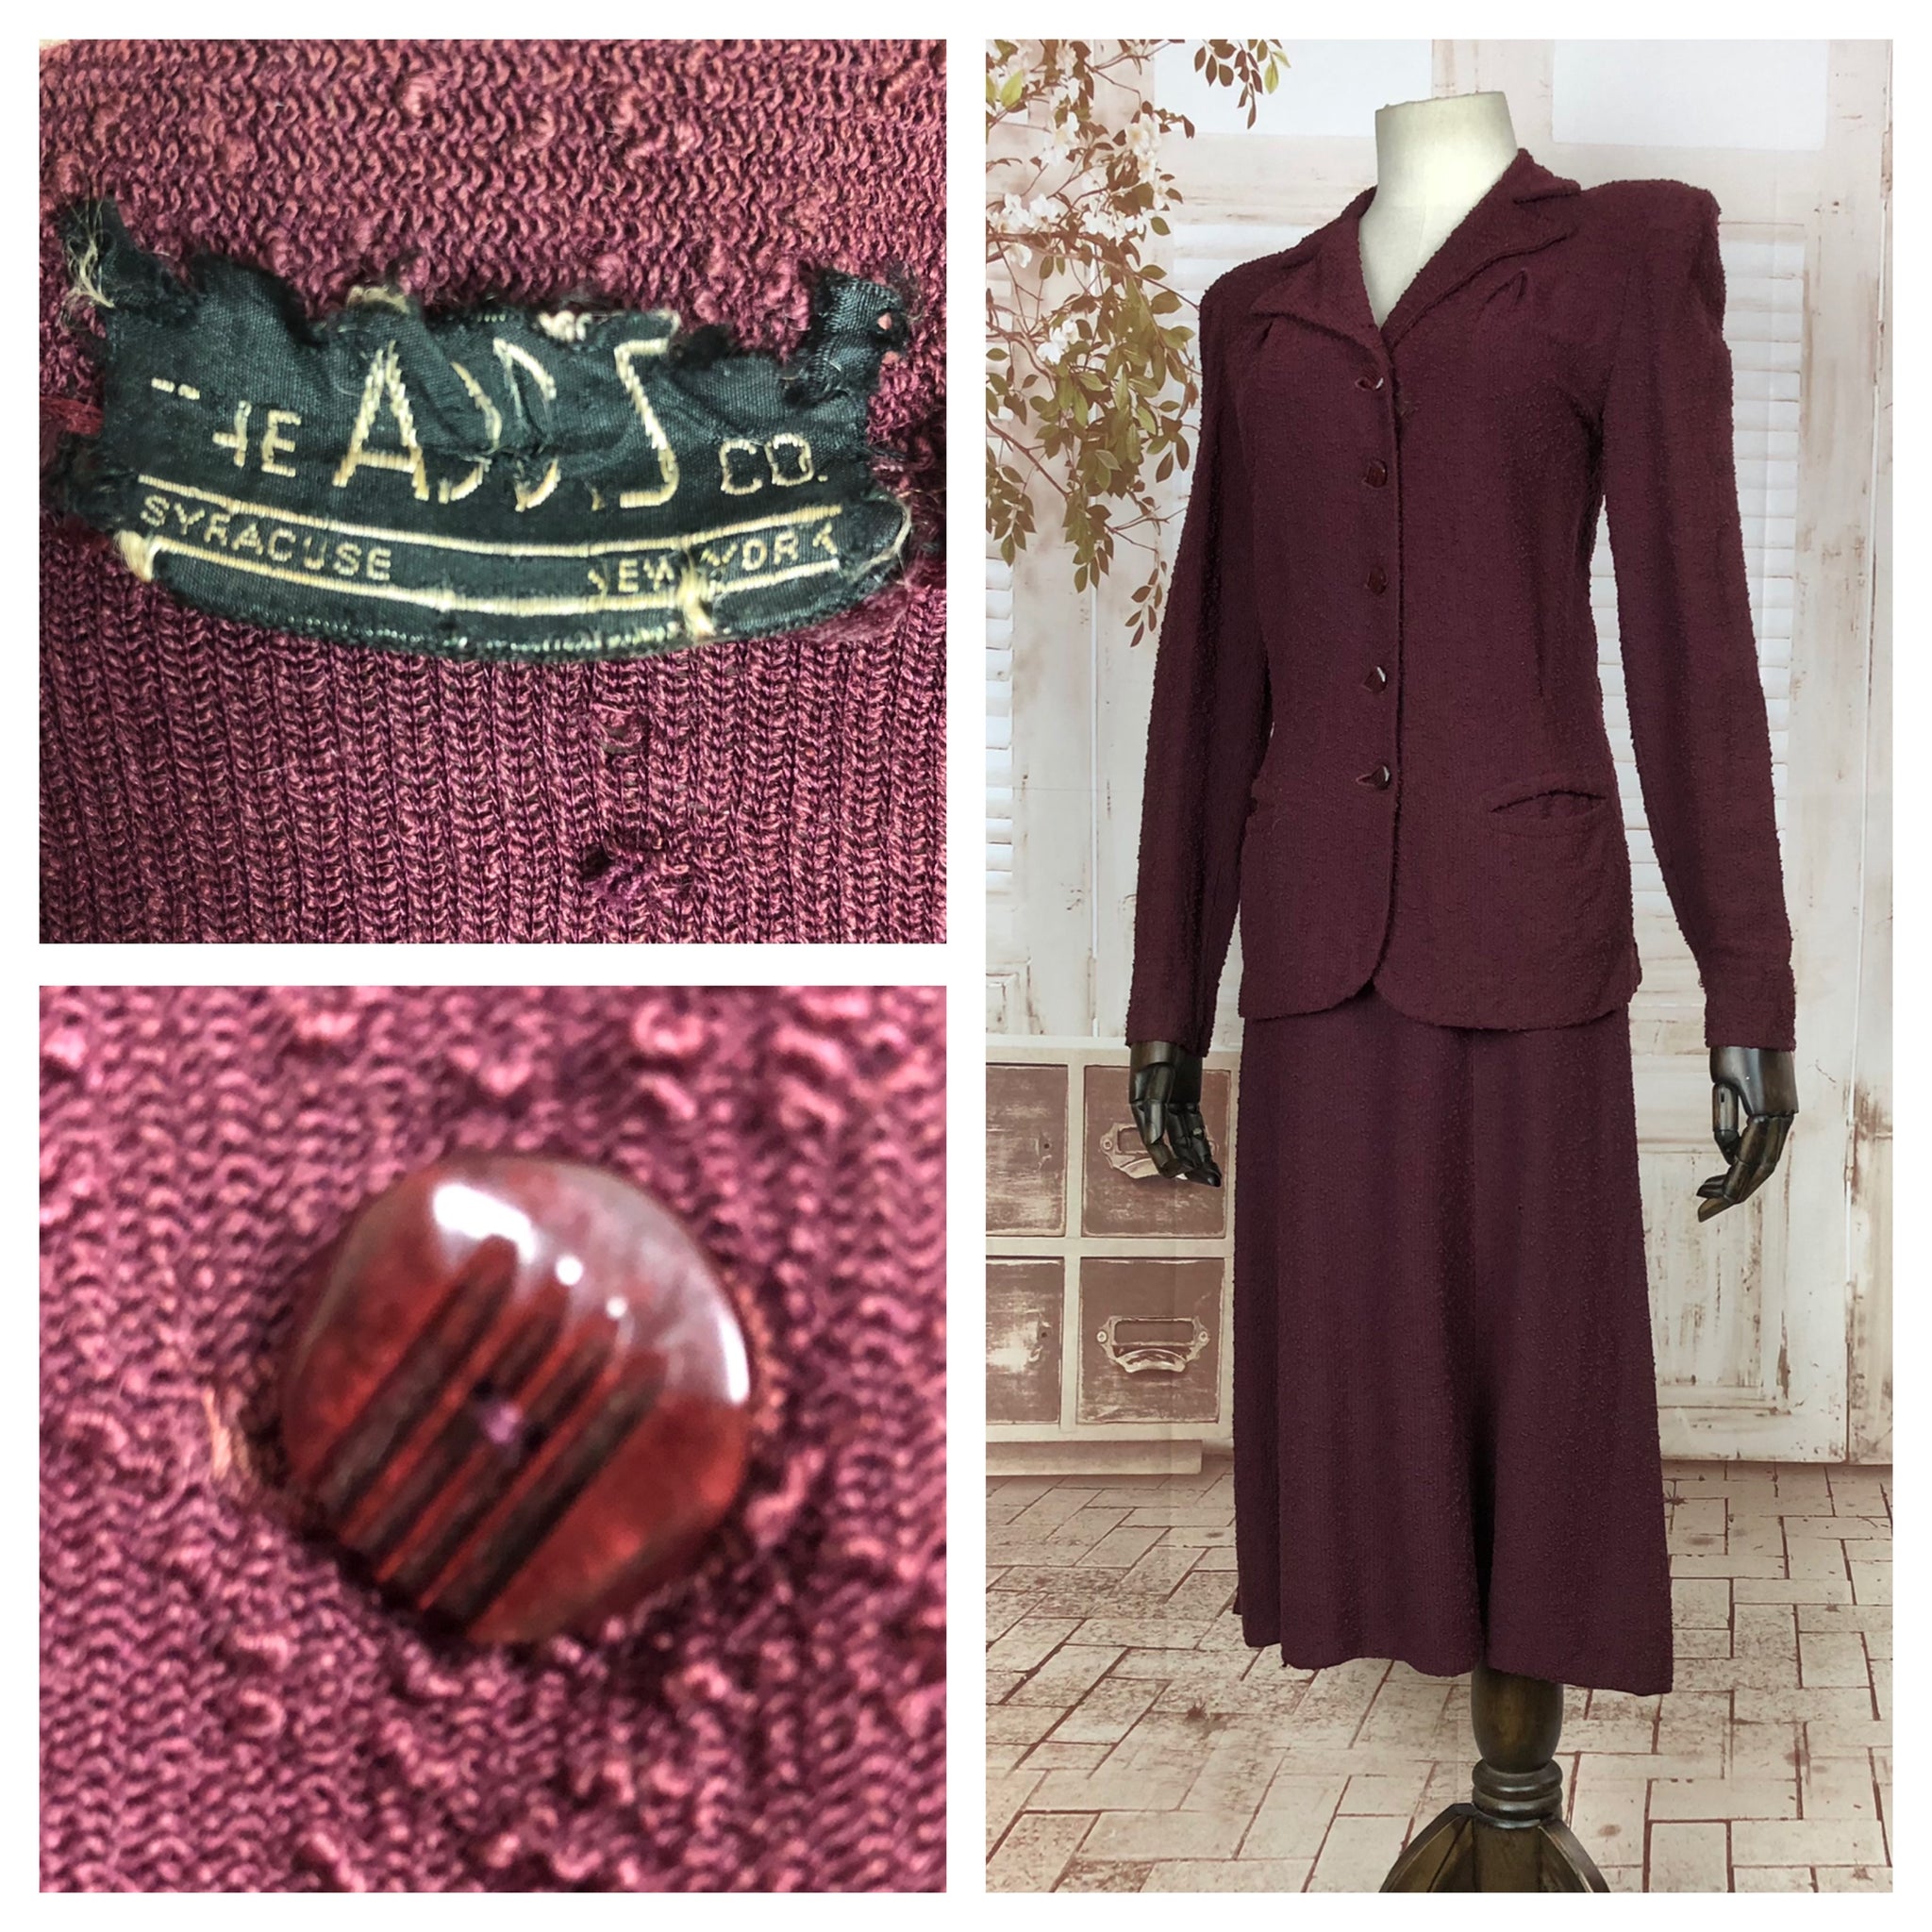 Fabulous Original Vintage 1940s 40s Burgundy Nubby Wool Suit By The Addis Co